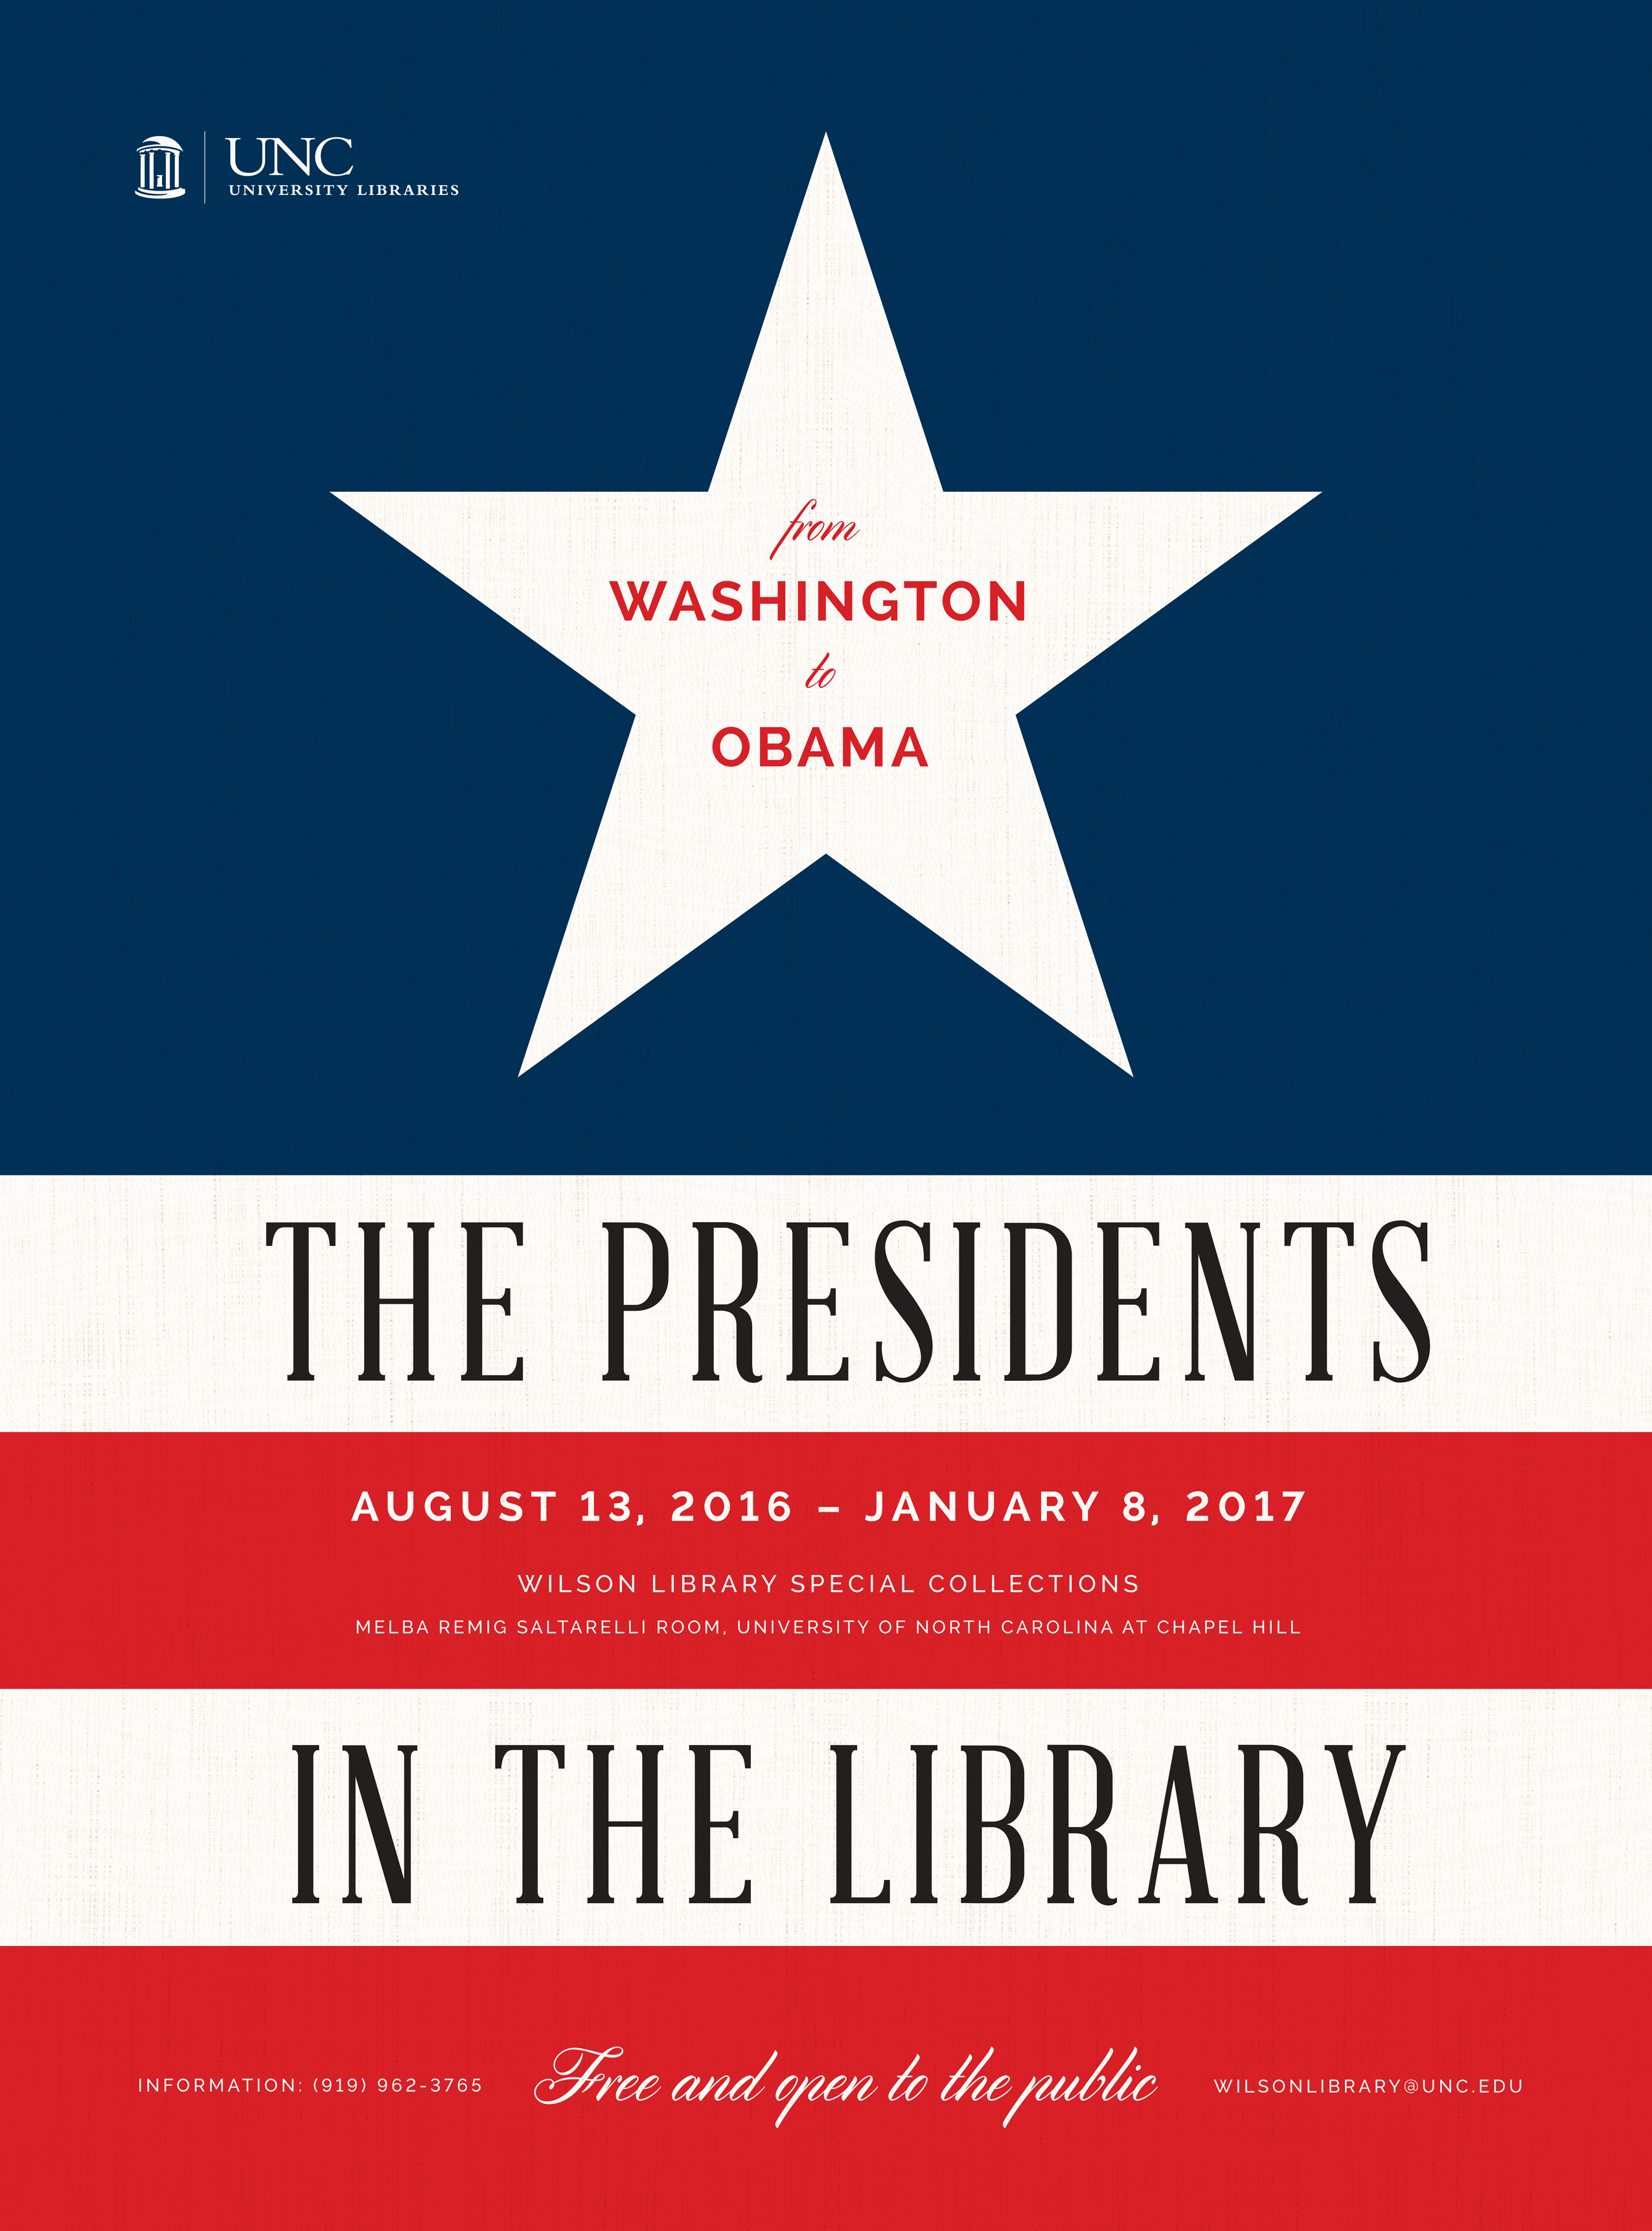 The Presidents in the Library exhibit poster